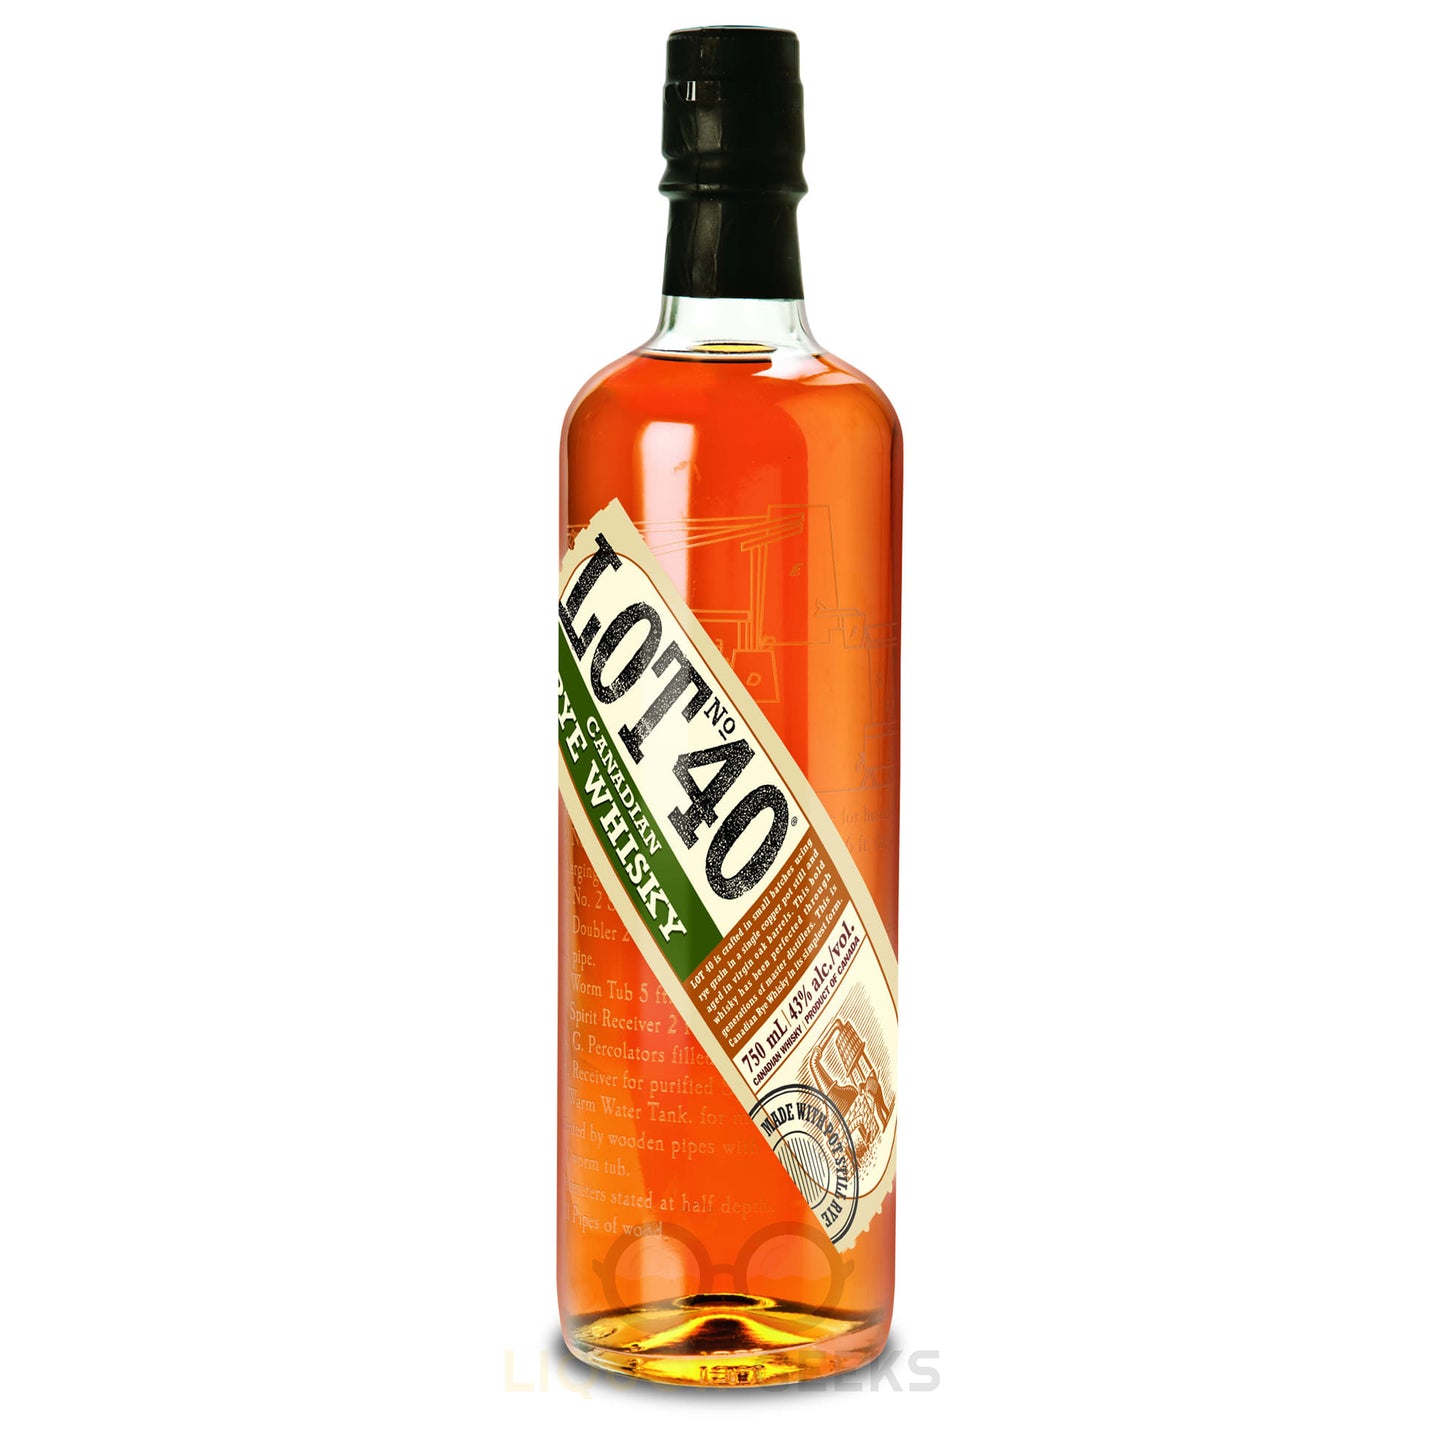 Lot 40 Canadian Rye Whisky - L Geeks